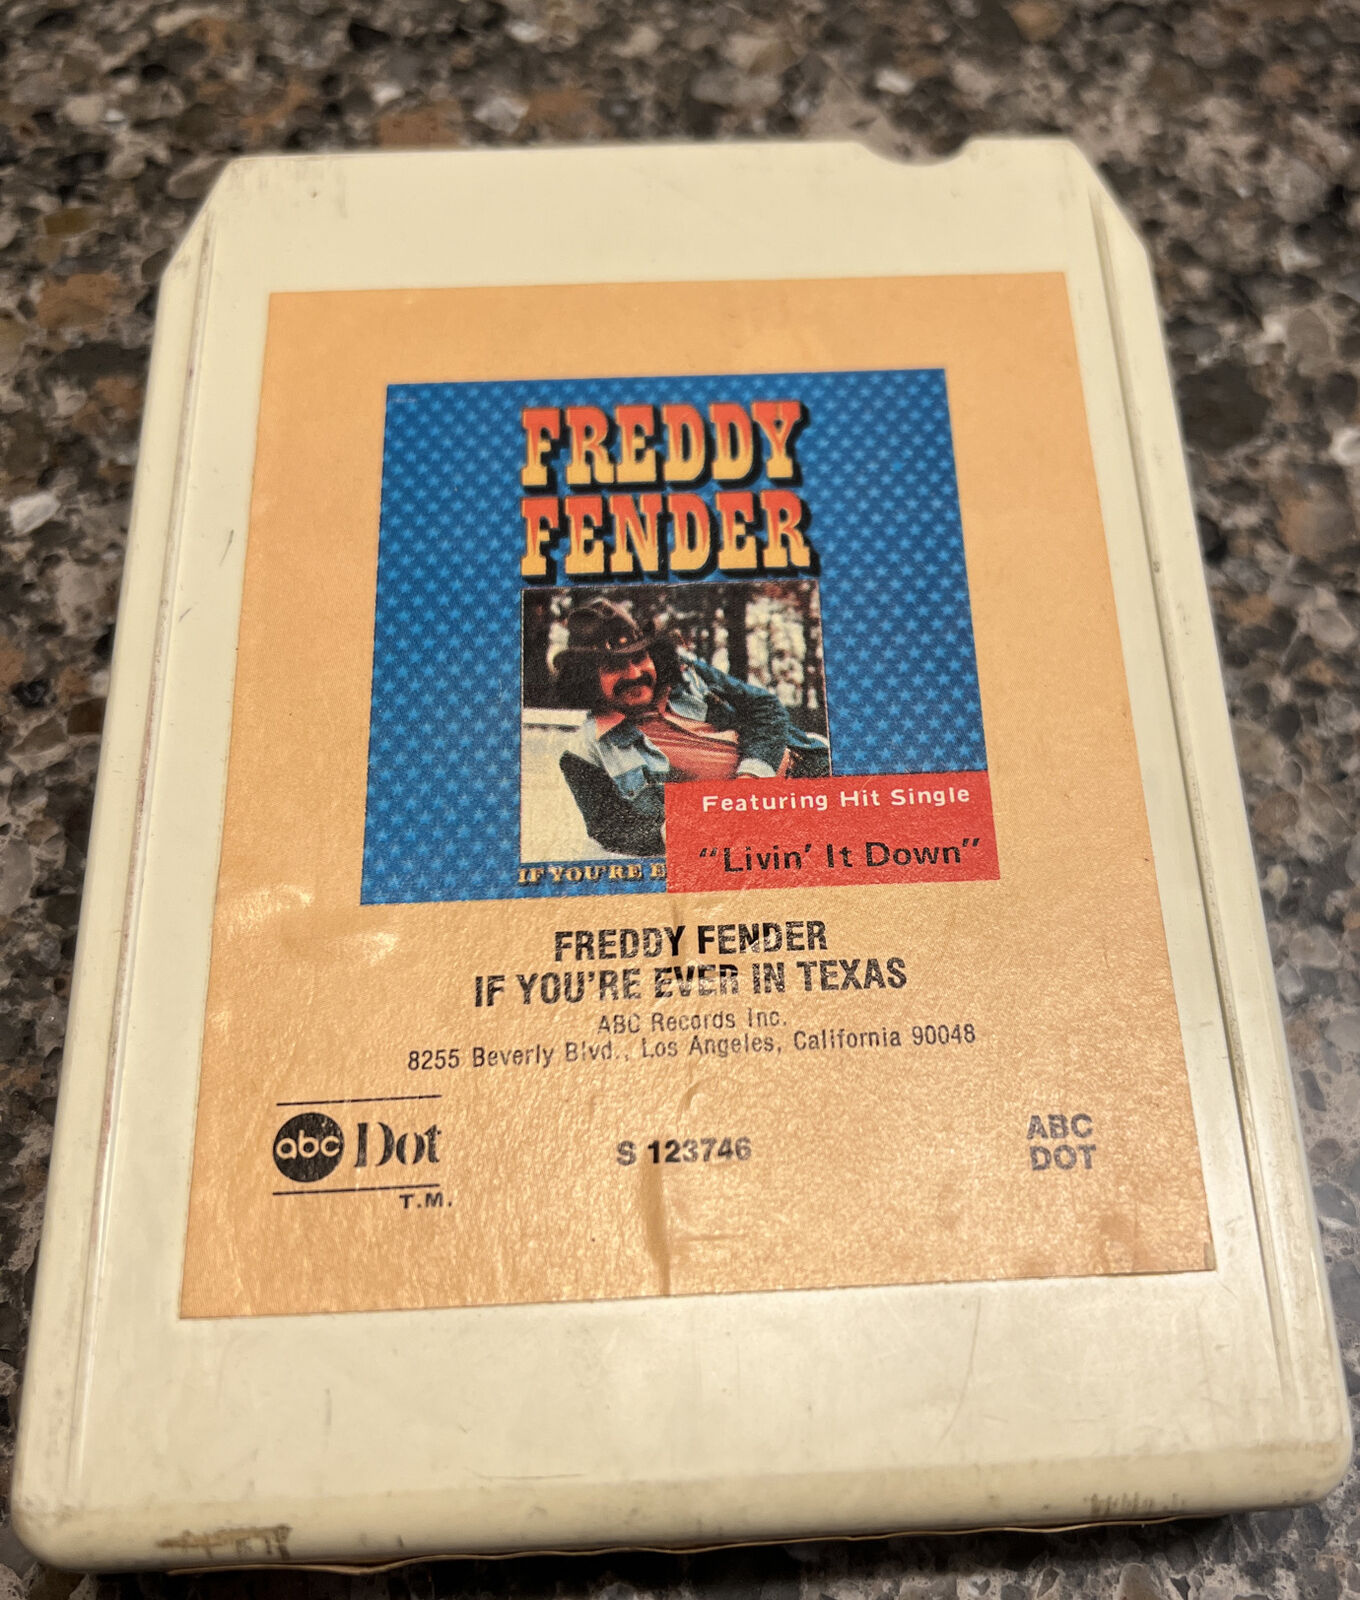 FREDDY FENDER 8 TRACK -- IF YOU\'RE EVER IN TEXAS--1976 ABC DOT 